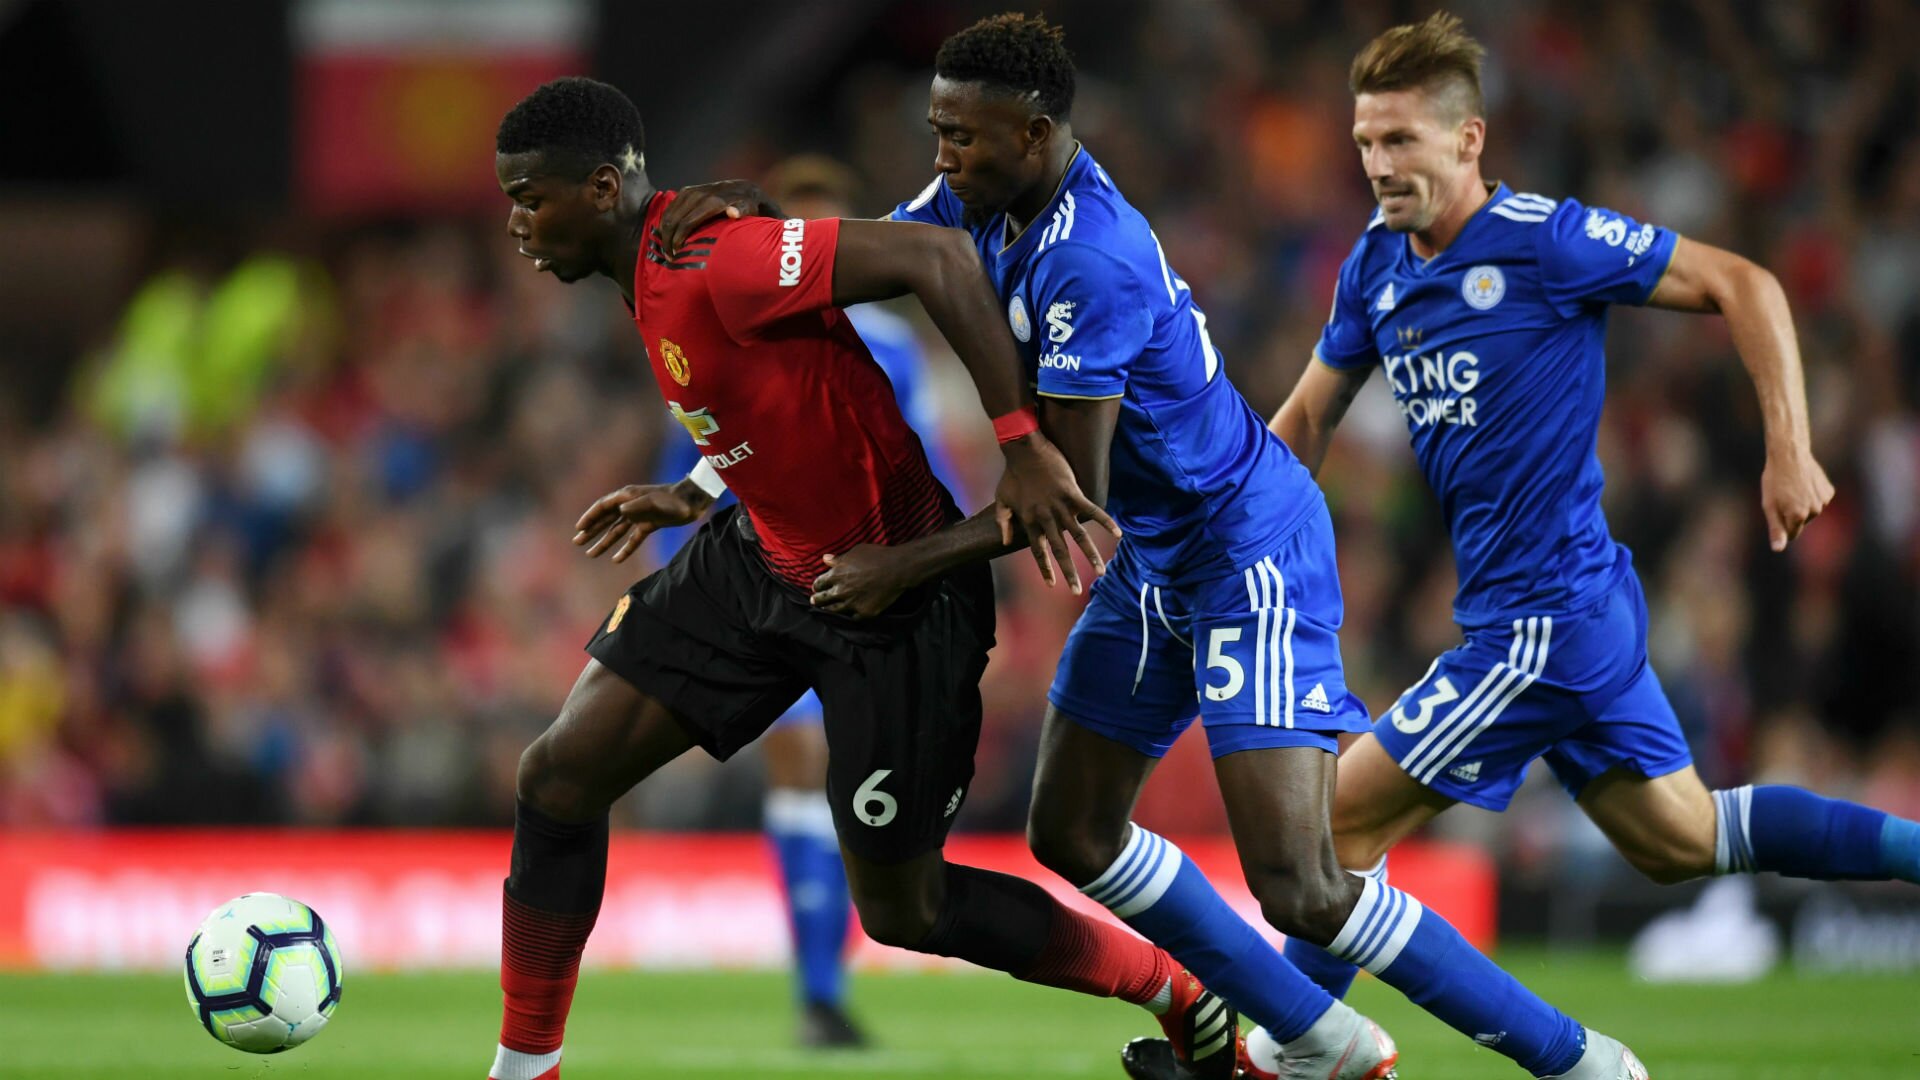 Ndidi Rues His Missed Scoring Chance In 1-0 Loss To Manchester United